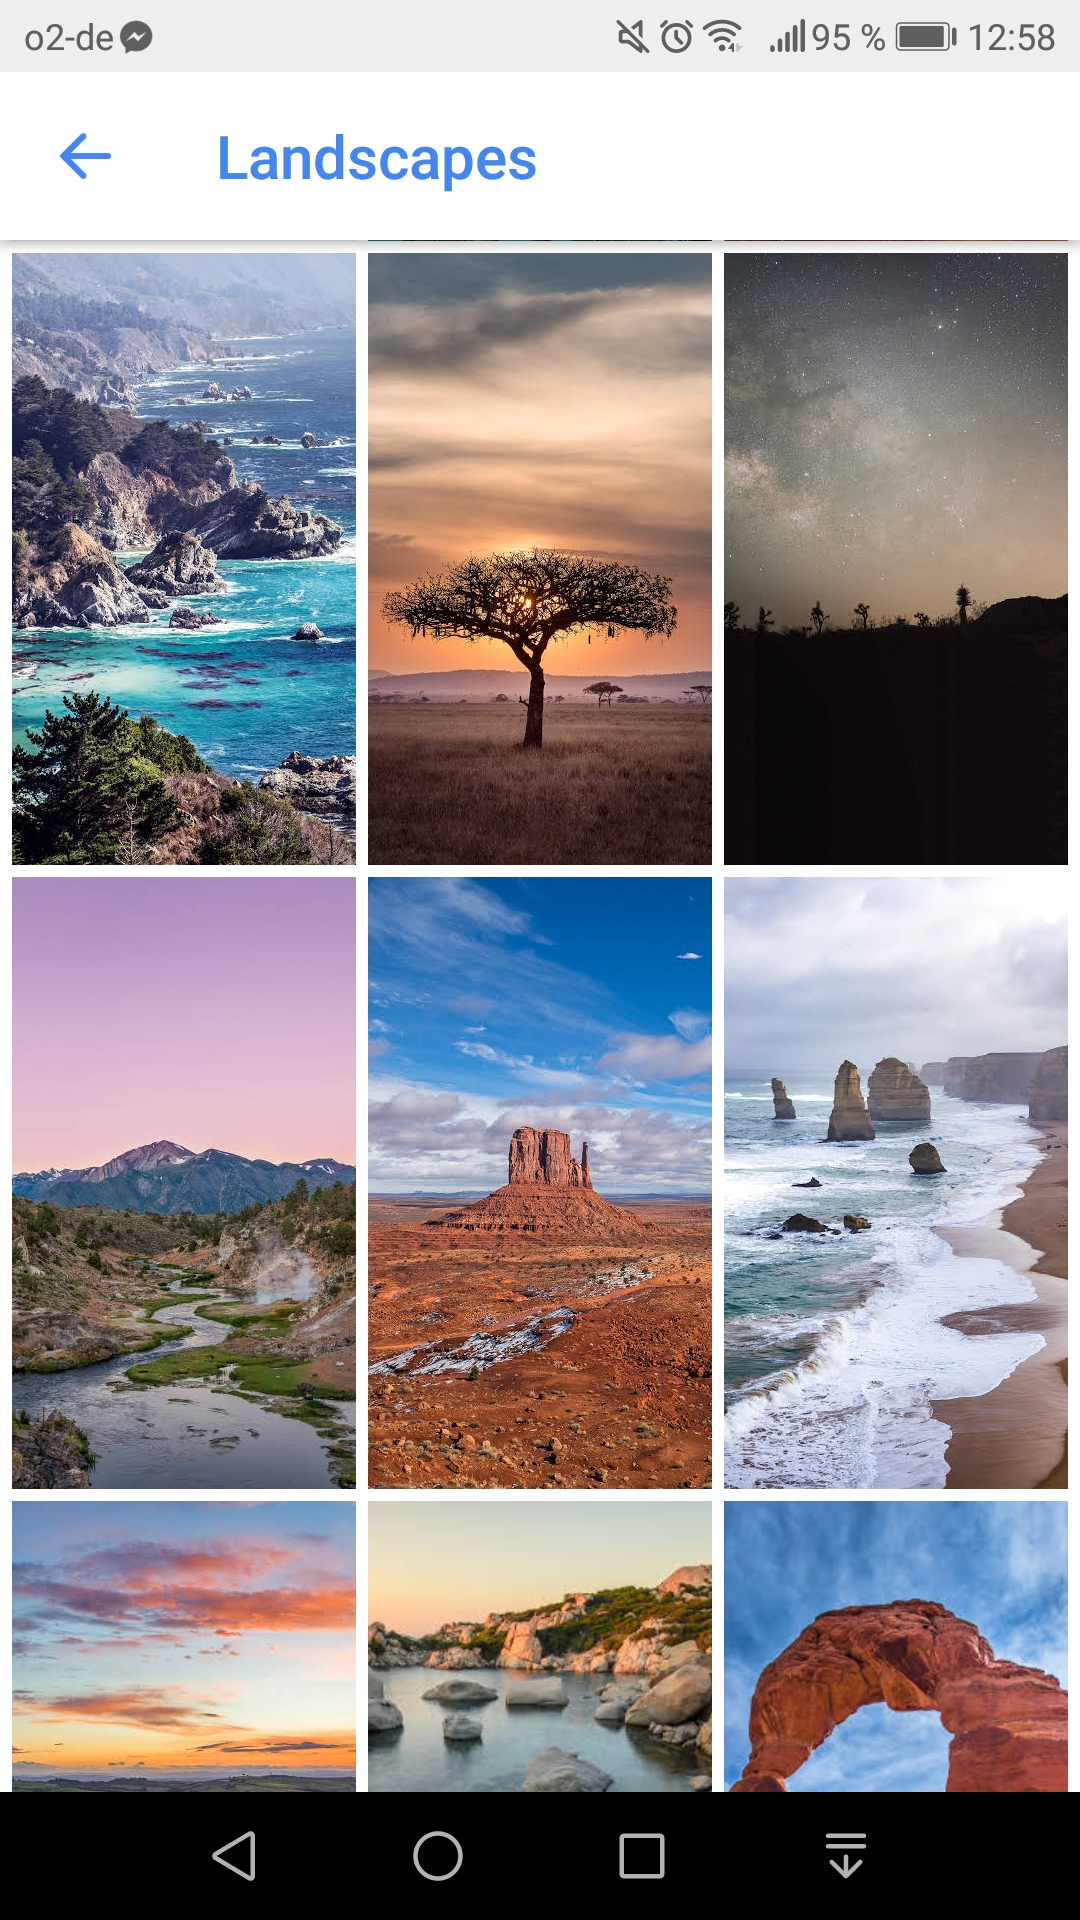 Wallpapers from the Google Wallpapers app.